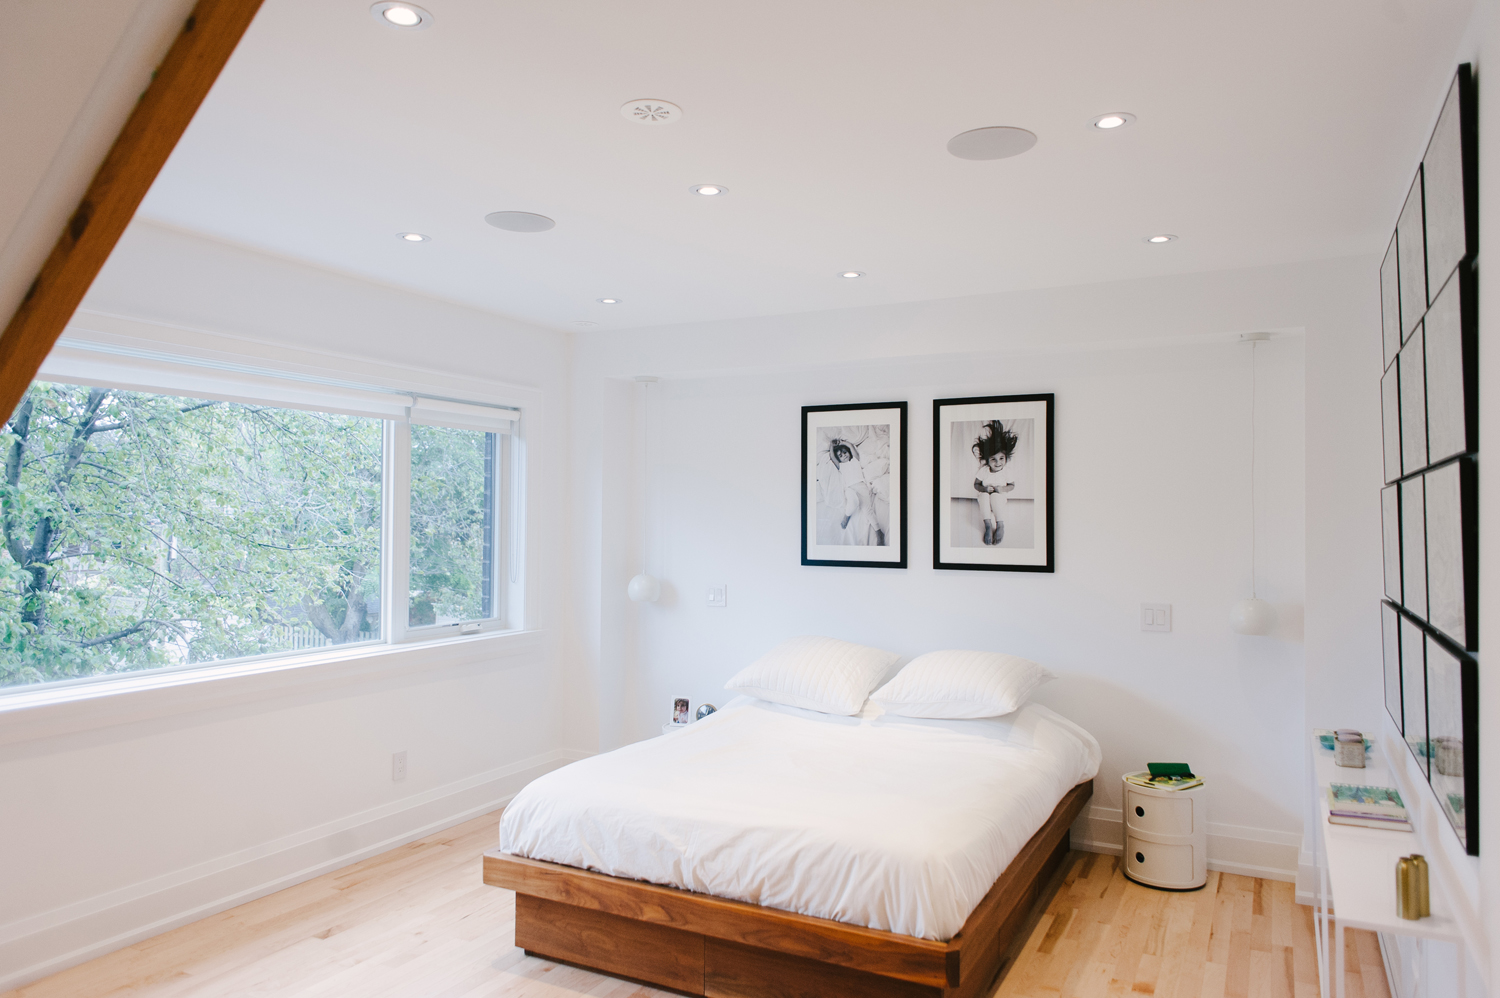 Low wooden bed frame in all-white master bedroom